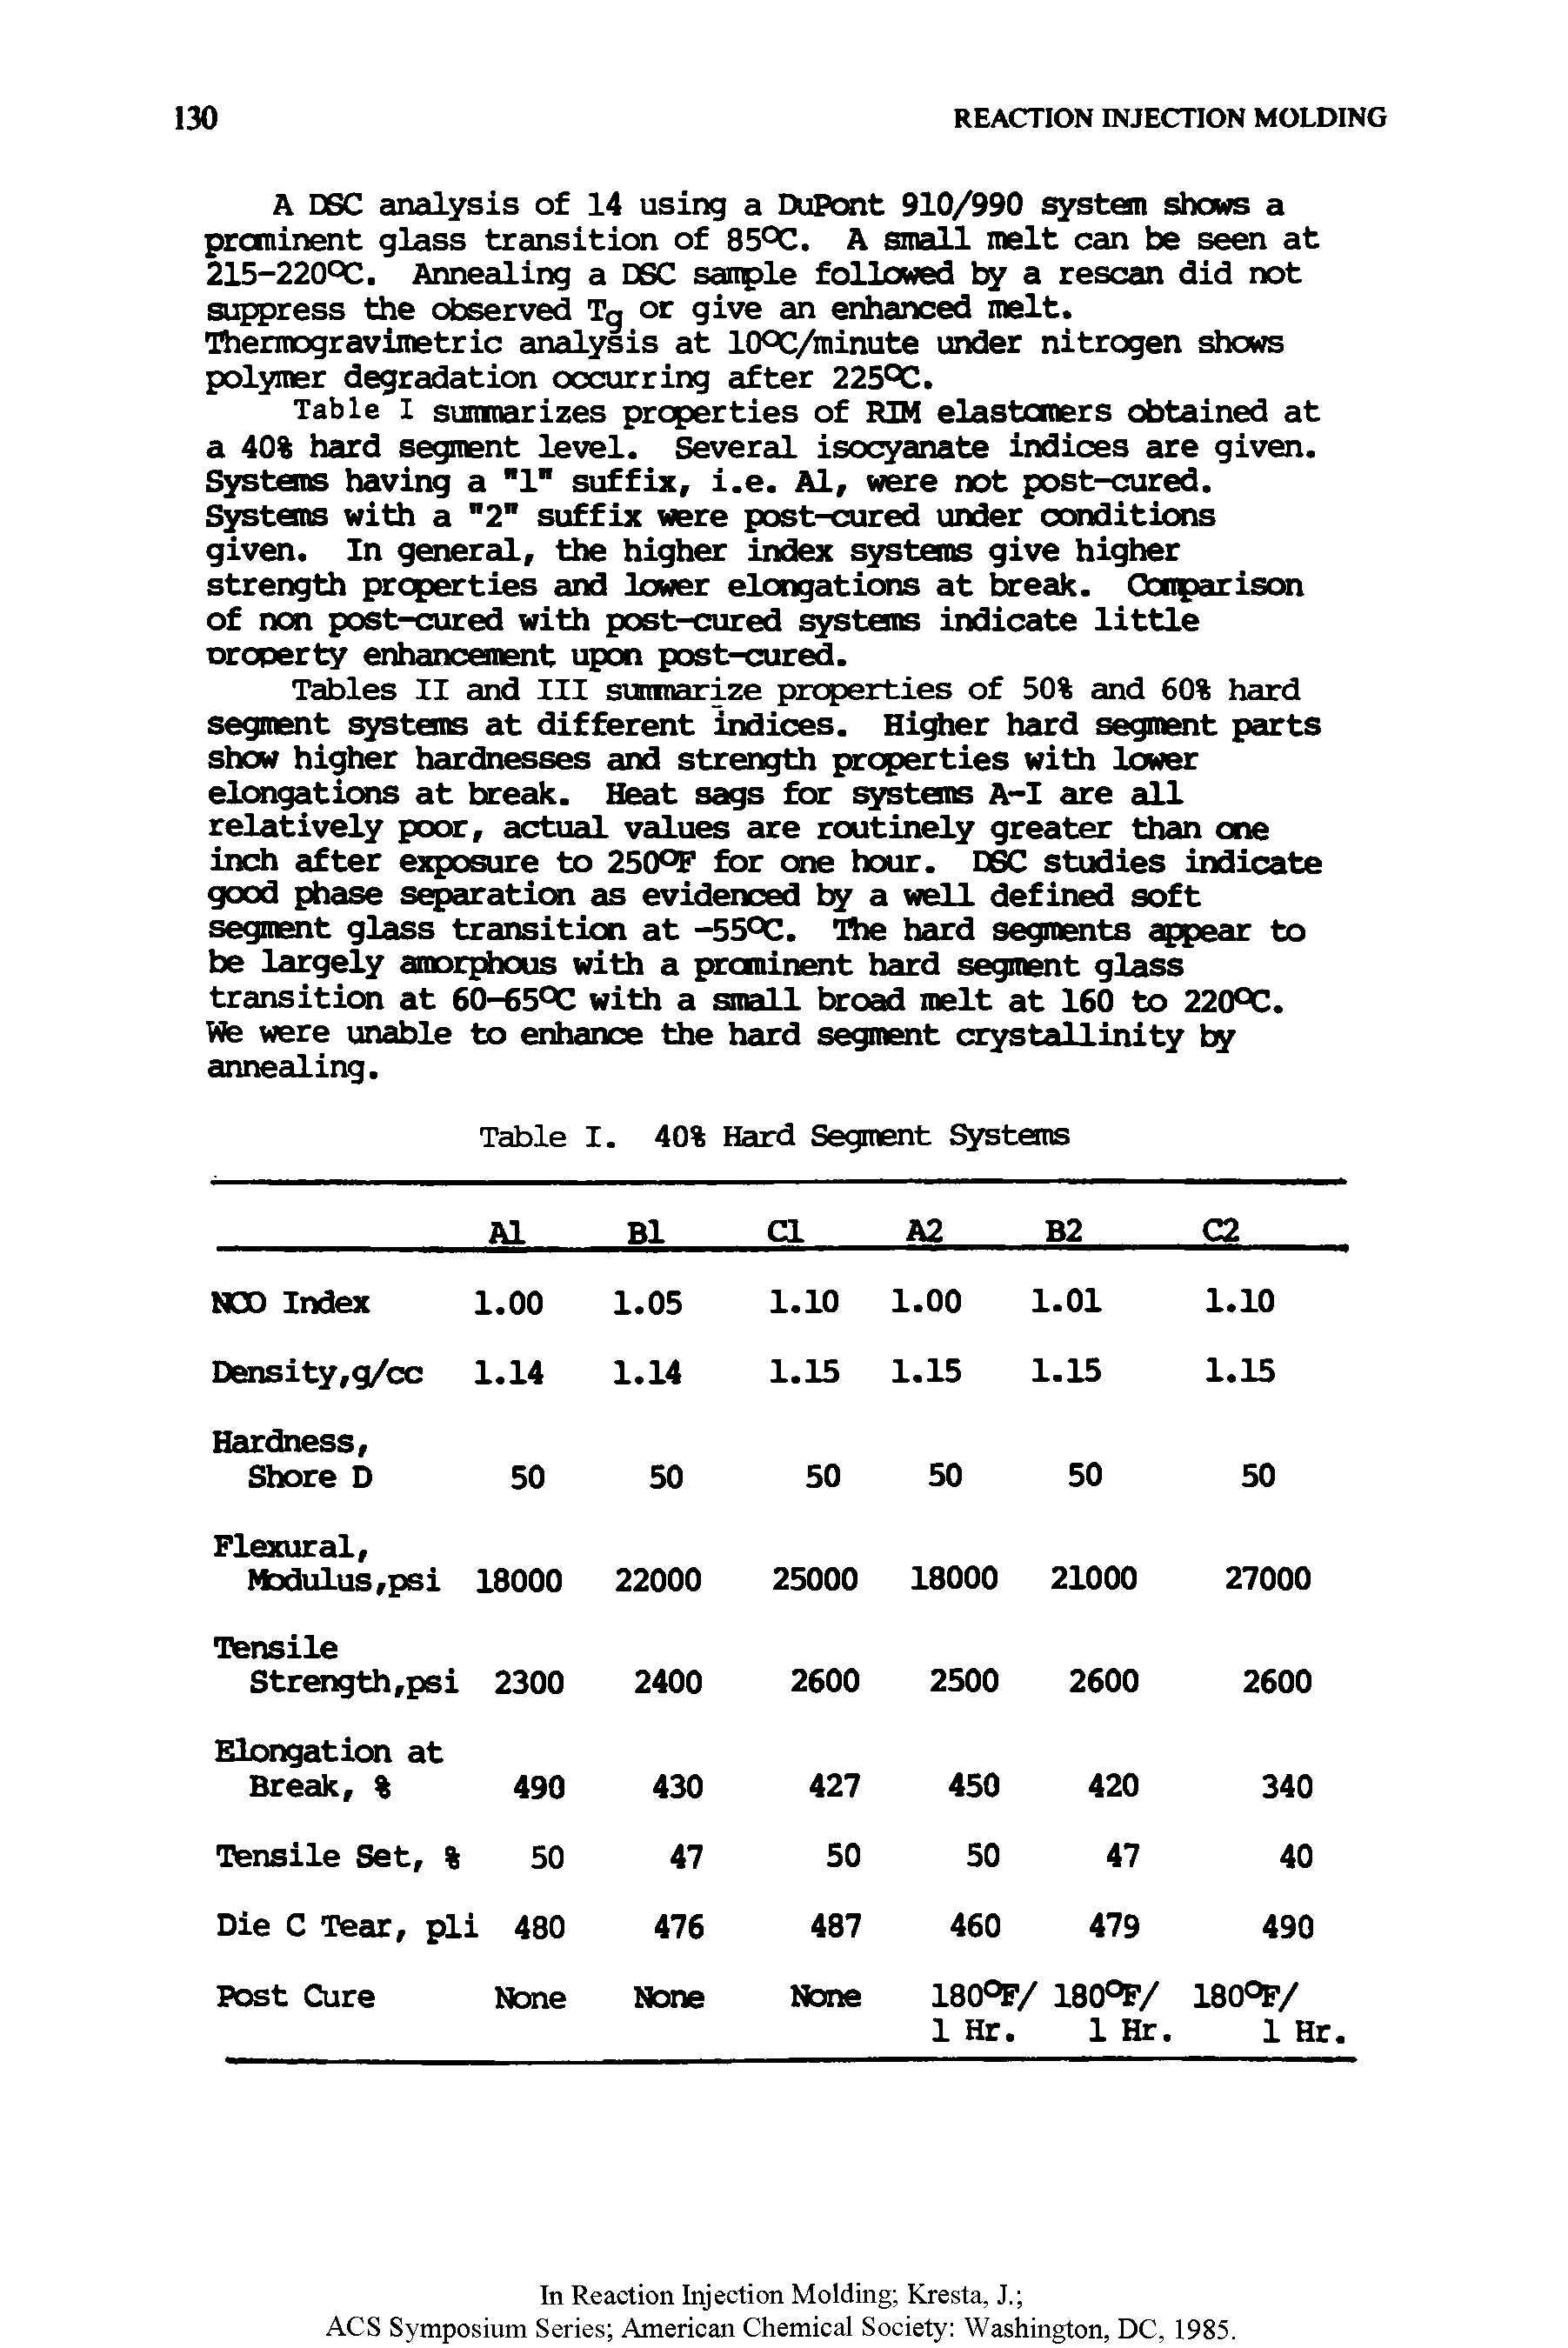 Table I summarizes properties of RIM elastomers obtained at a 40% hard segment level. Several isocyanate indices are given. Systems having a 1" suffix, i.e. Al, were not post-cured. Systems with a "2" suffix were post-cured under conditions given. In general, the higher index systems give higher strength properties and lower elongations at break. Ccnparison of non post-cured with post-cured systems indicate little oroperty enhancement upon post-cured.